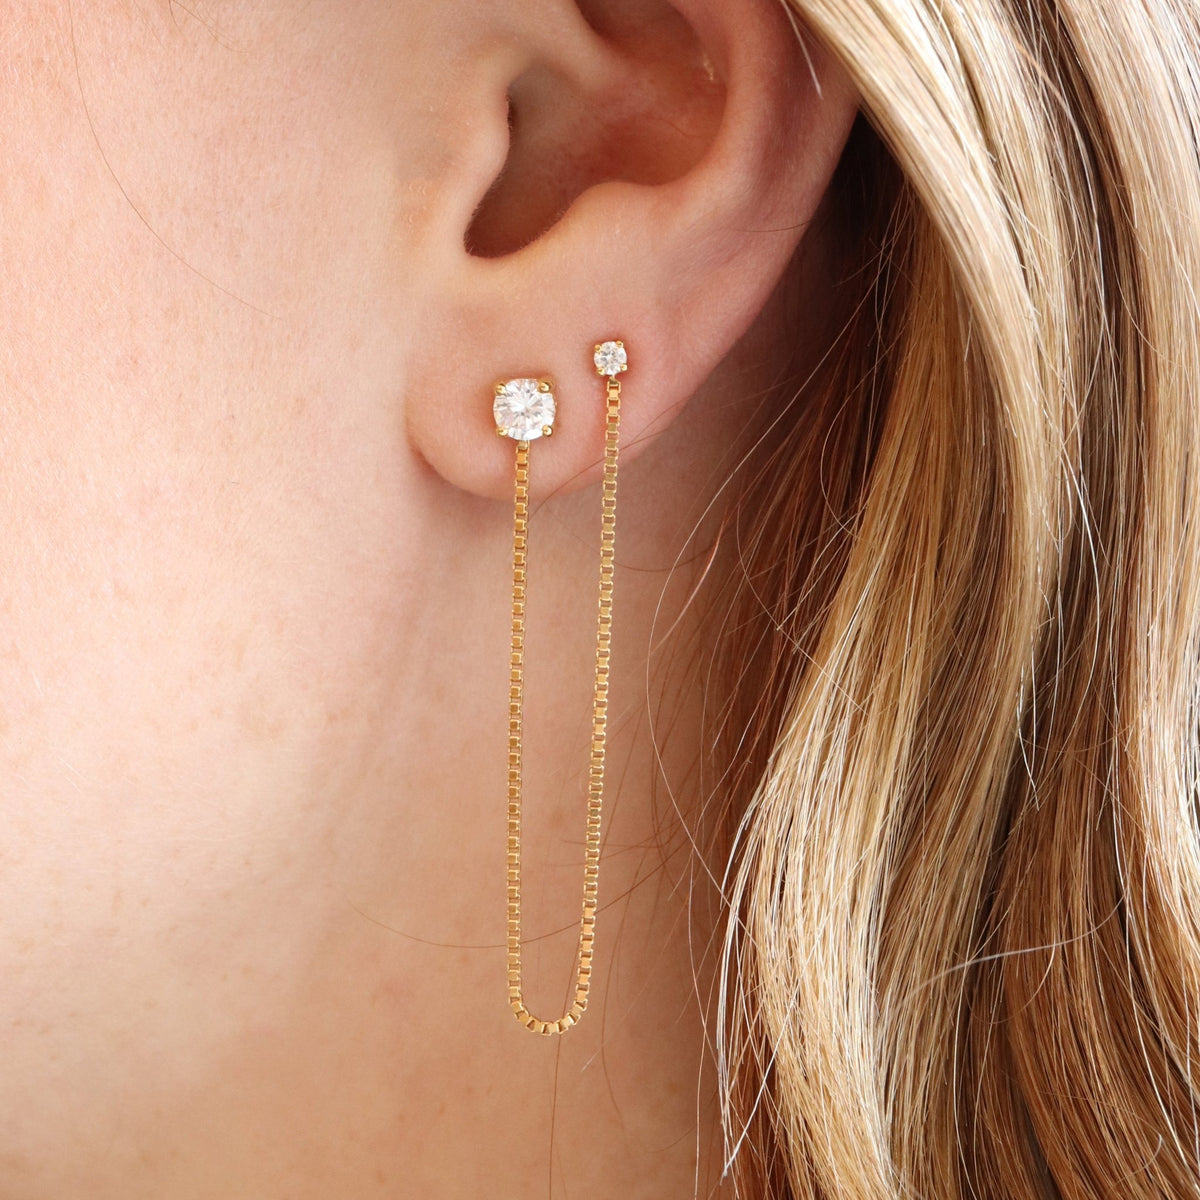 LOVE CHAIN DUO STUD - CUBIC ZIRCONIA &amp; GOLD - SO PRETTY CARA COTTER